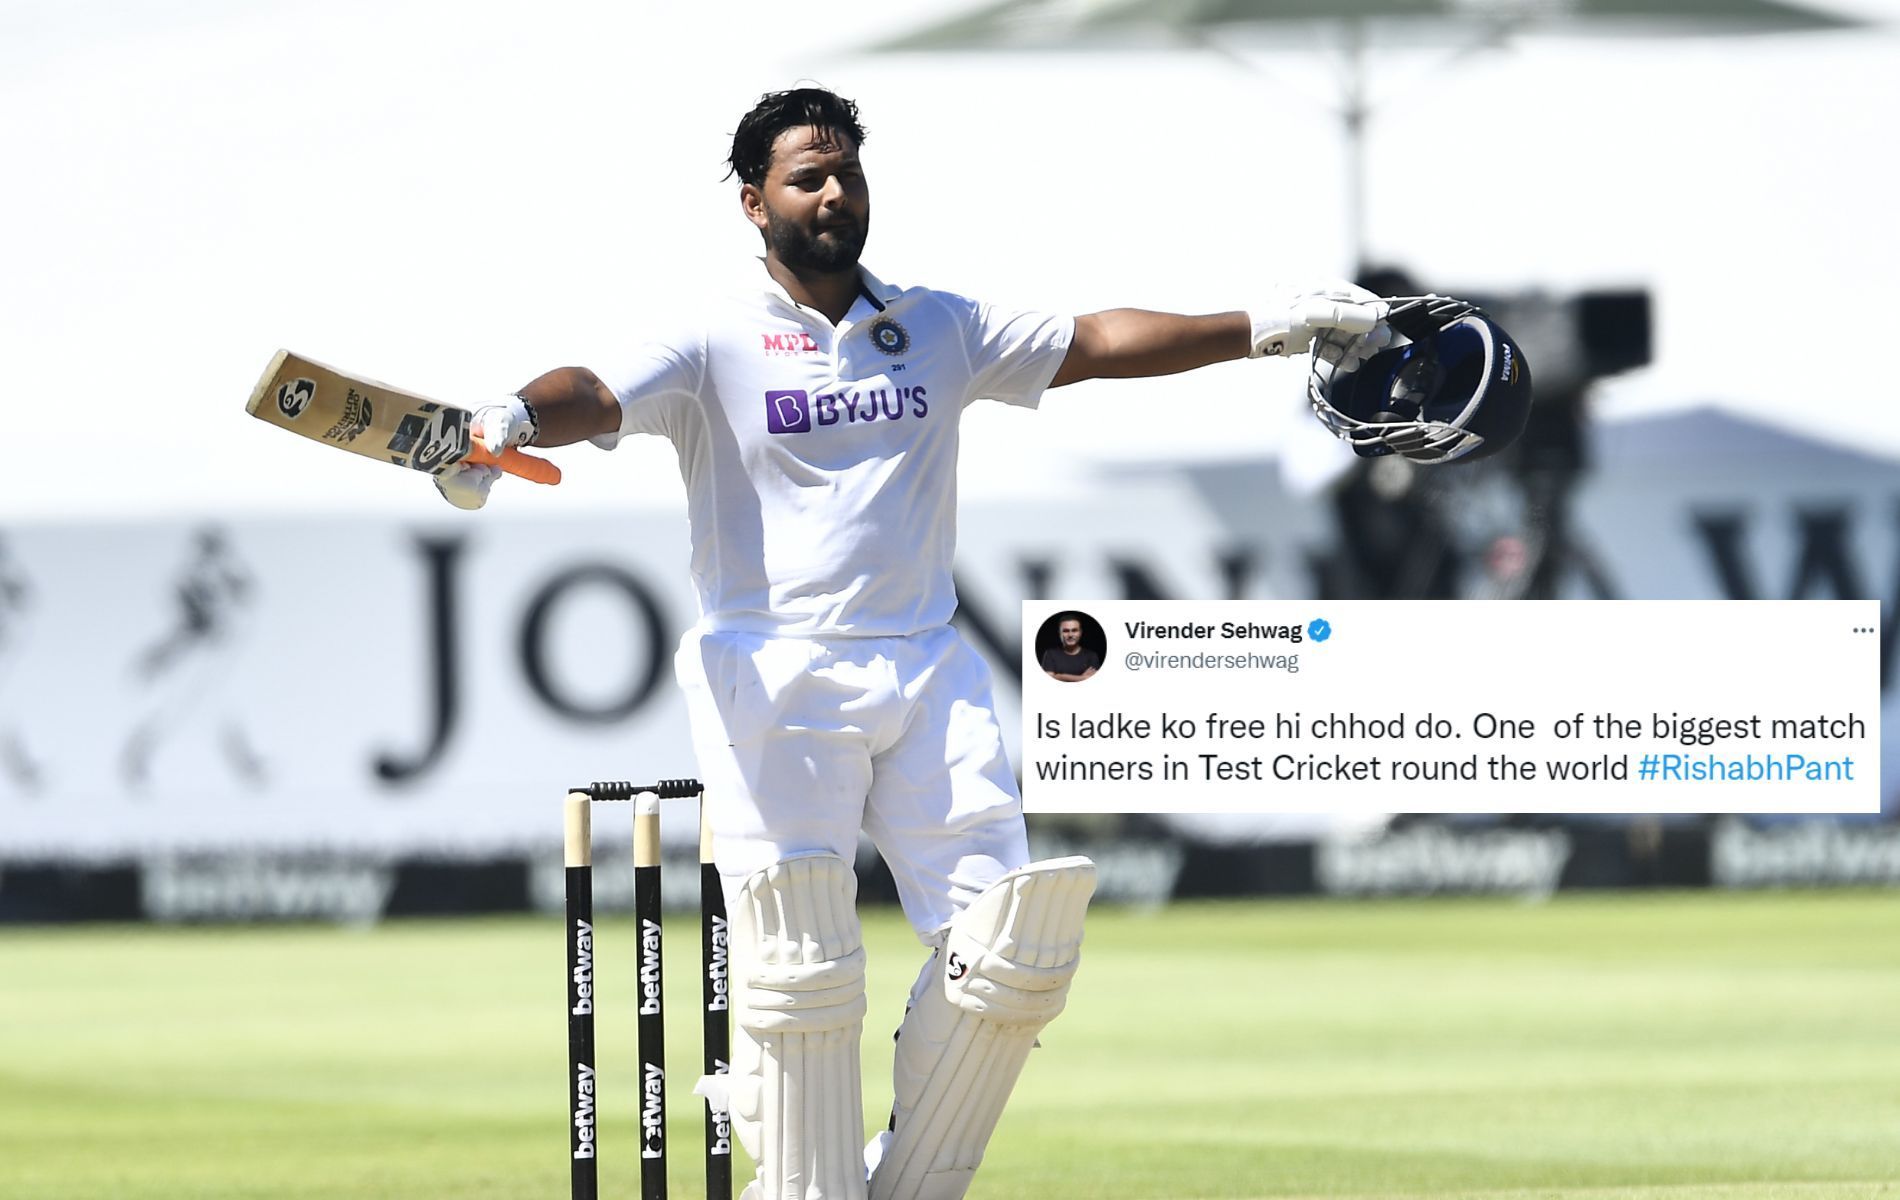 Rishabh Pant was lauded on social media for his unbeaten 139-ball 100 against South Africa.